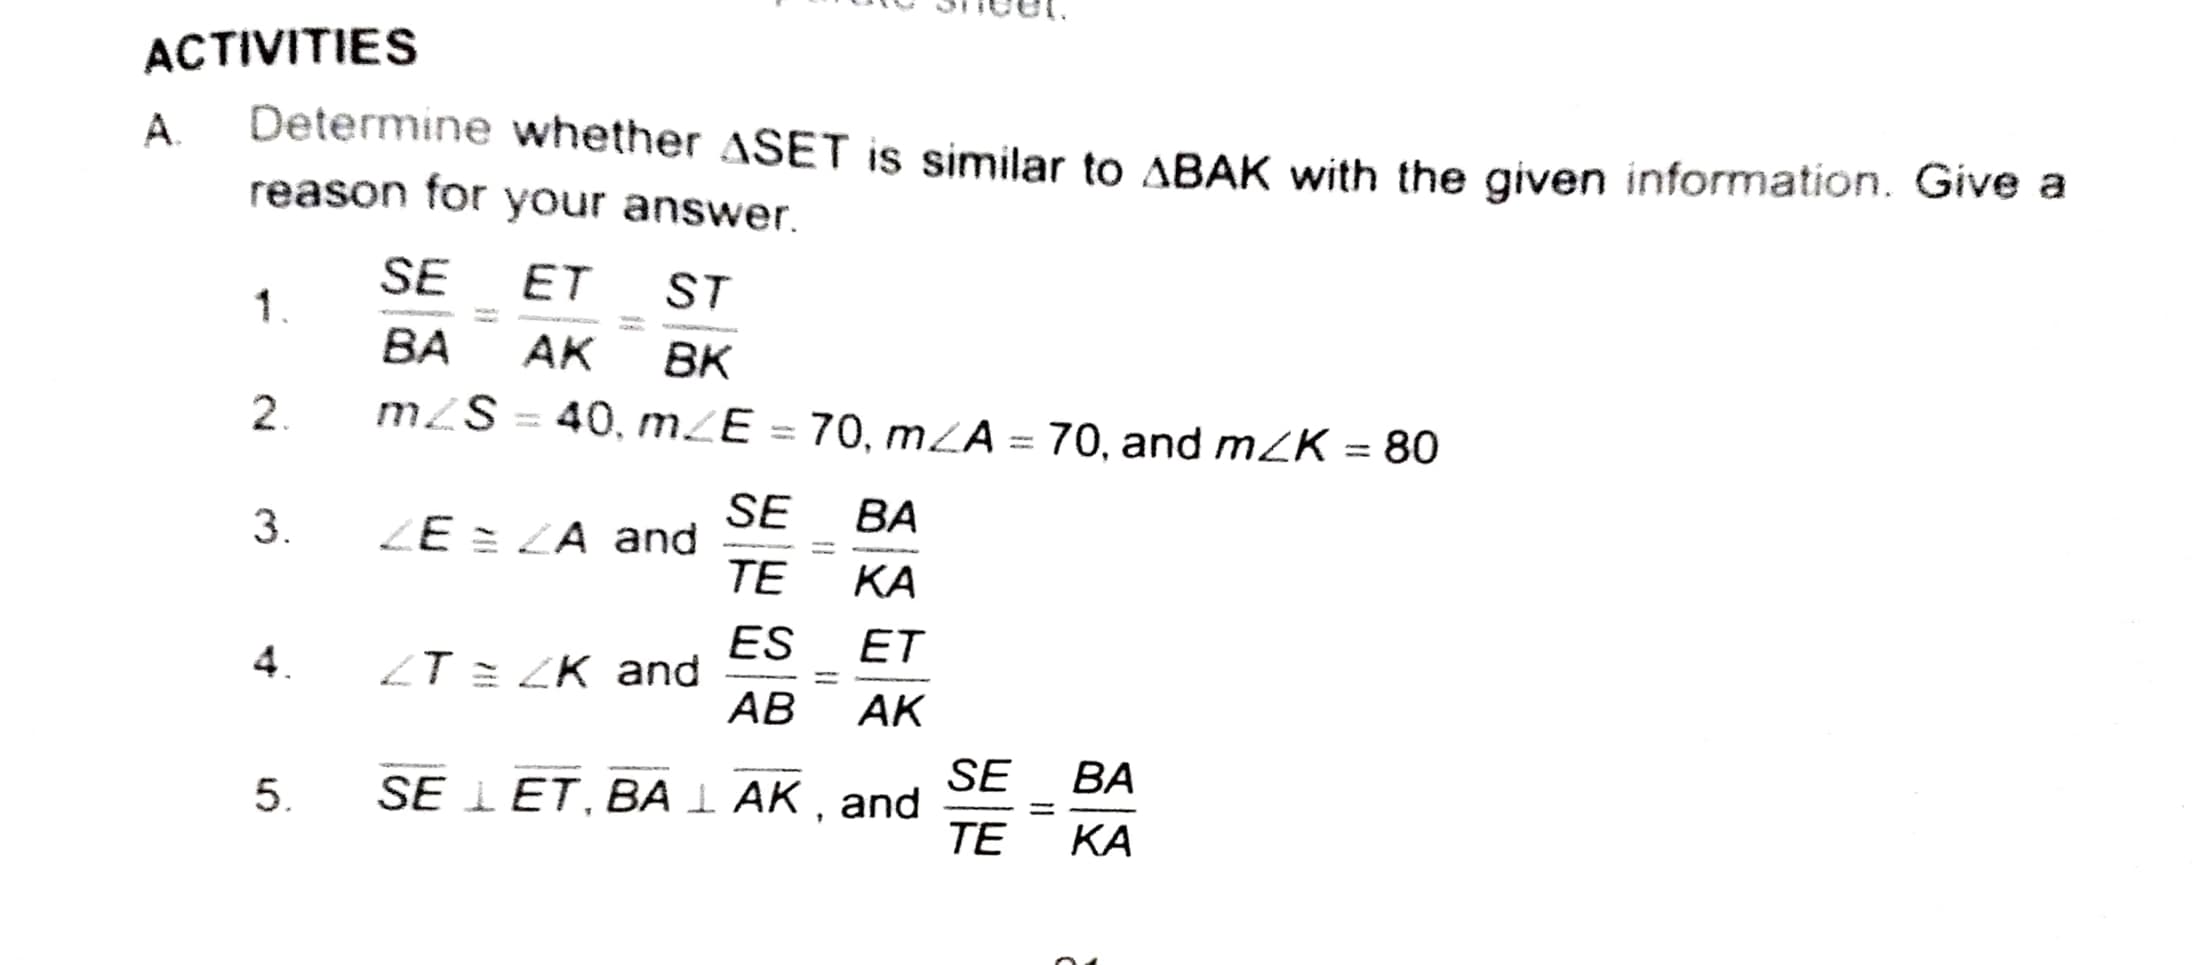 ACTIVITIES
А.
Determine whether ASET is similar to ABAK with the given information. Give a
reason for your answer.
SE
ET
ST
1
ВА
АК
BK
2.
m2S = 40, mZE = 70, mZĀ = 70, and mZK = 80
%3D
%3D
SE
ZE = LA and
ТЕ
ВА
3.
КА
ES
ZT = ZK and
АВ
ET
4.
AK
SE
SE I ET, BA I AK , and
TE
ВА
5.
%3D
КА
